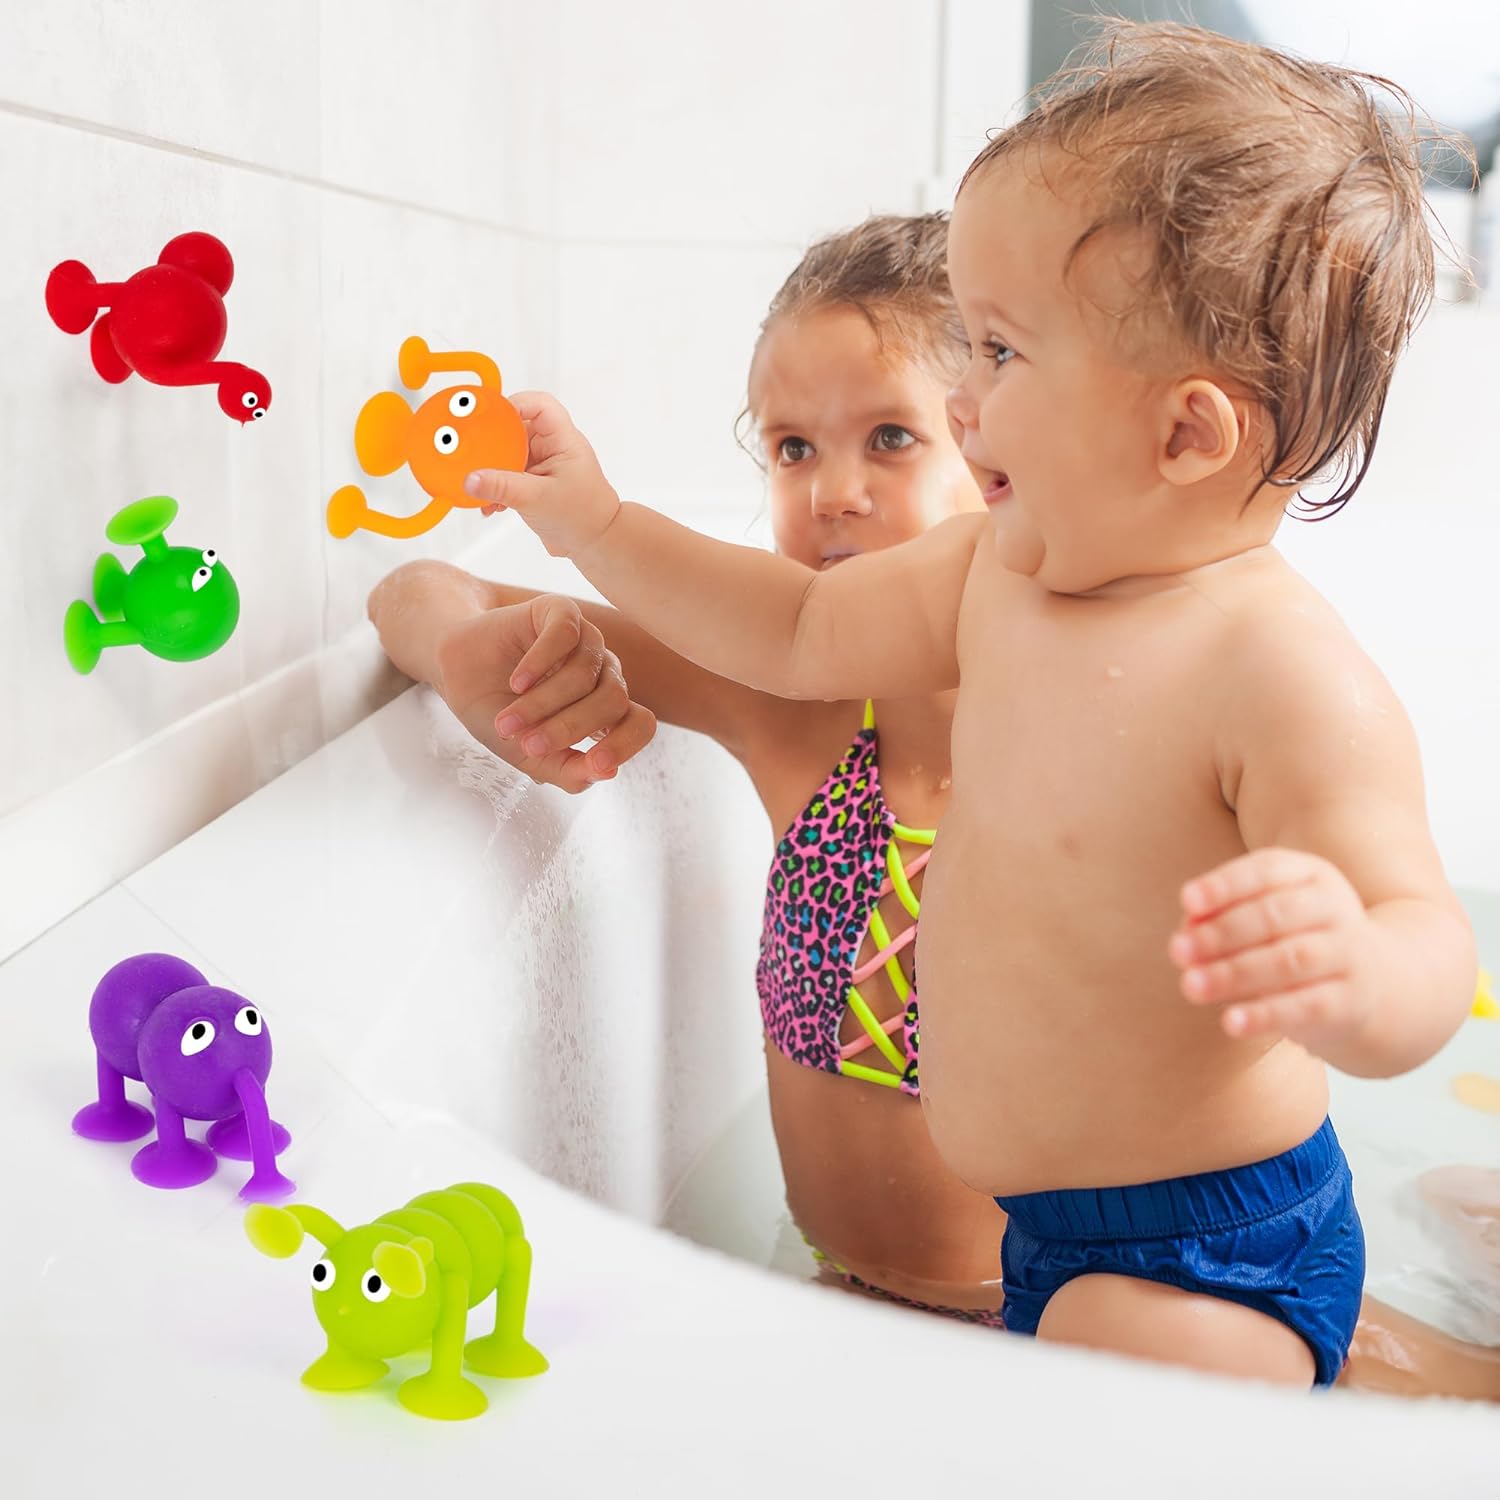 ArtCreativity Suction Creature Bath Toys for Kids - Set of 12 Suction Cup Toys - Mold Free Bath Toys in Assorted Colors and Shapes - Suction Bath Toys for Babies - Cool Creatures for Baththub Play